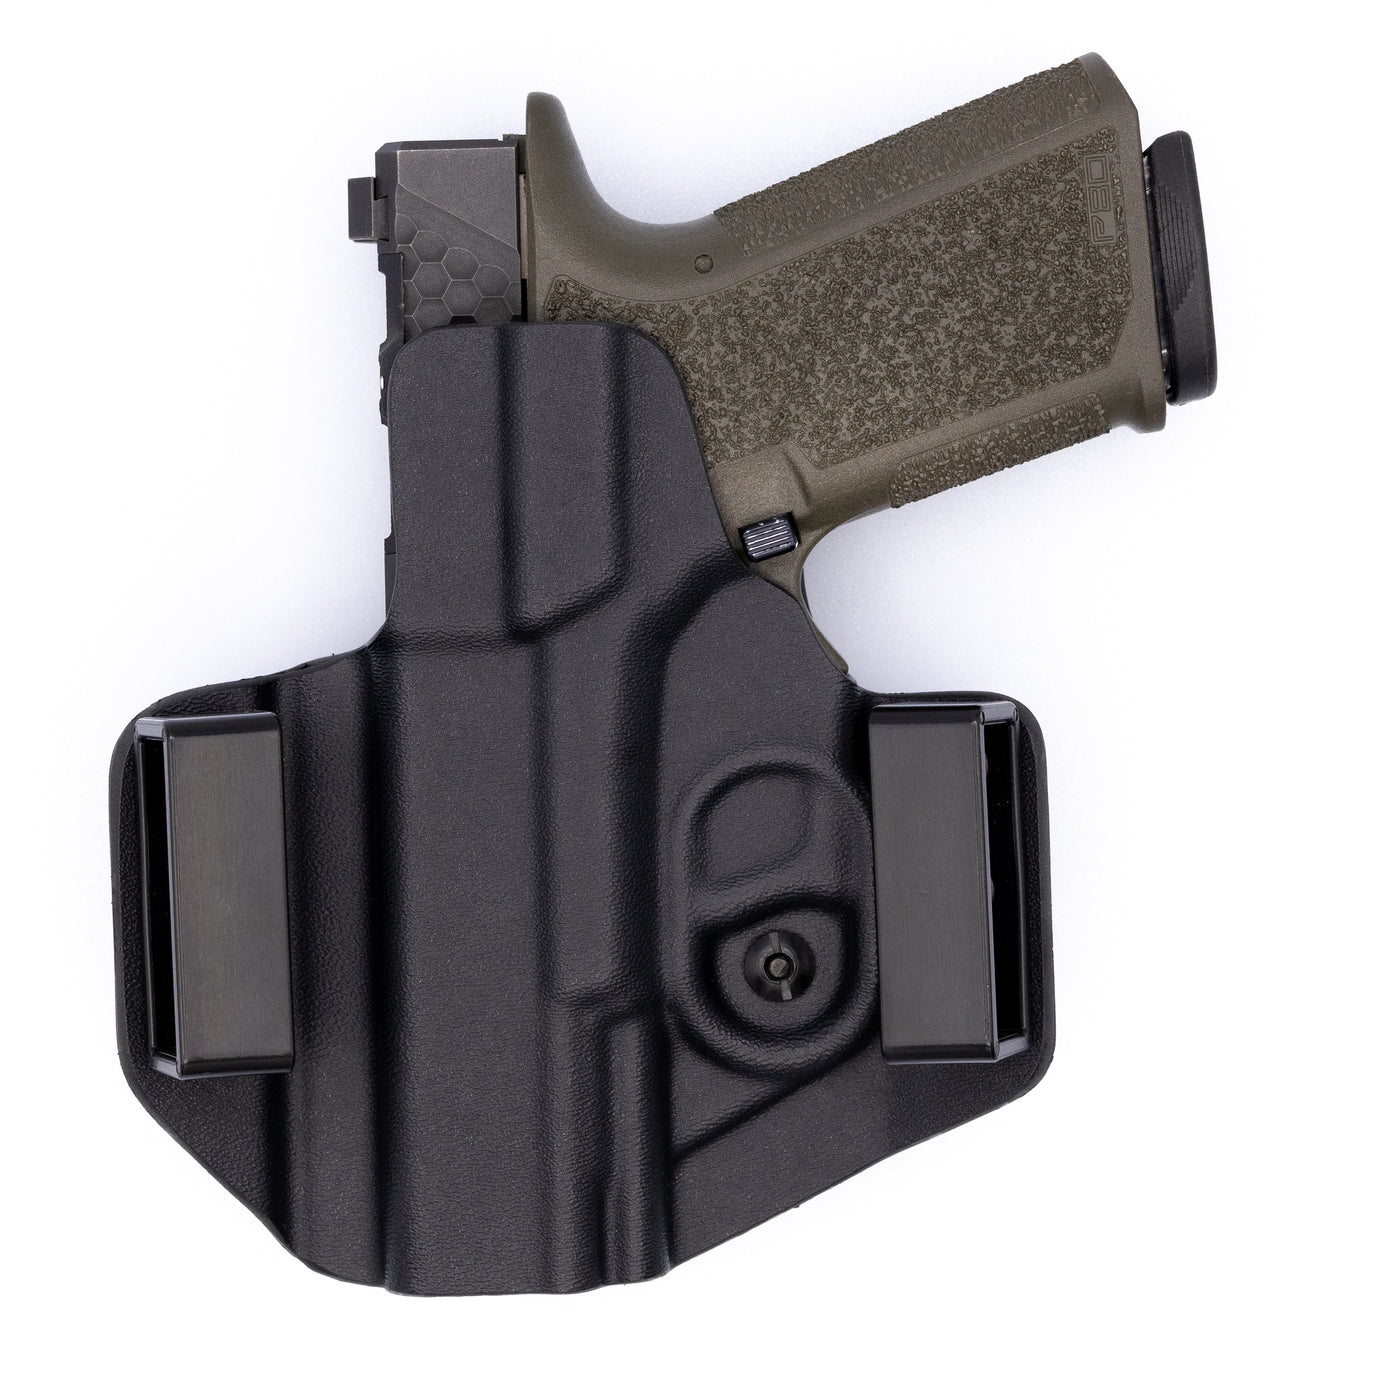 C&G Holsters OWB Outside the waistband Holster for the Polymer80 Poly80 PF9/40v2 PF9/40c in holstered position rear